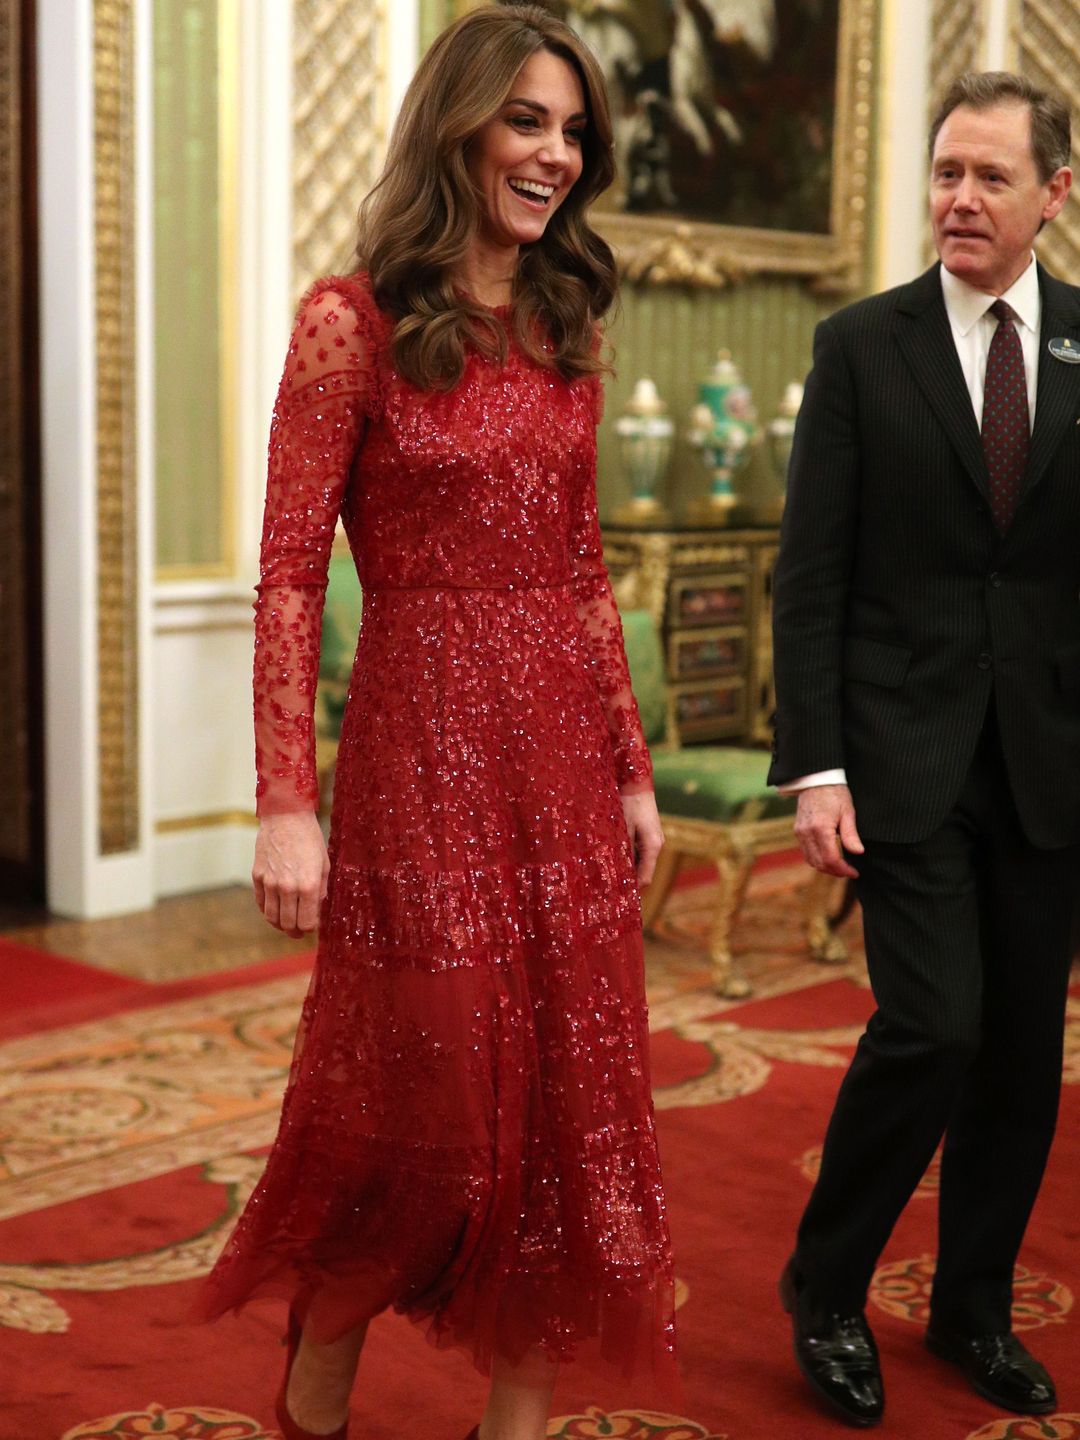 Britain's Catherine, Duchess of Cambridge (L) walks through to the State Room at a reception for heads of State and Government at Buckingham Palace wearing Needle & Thread